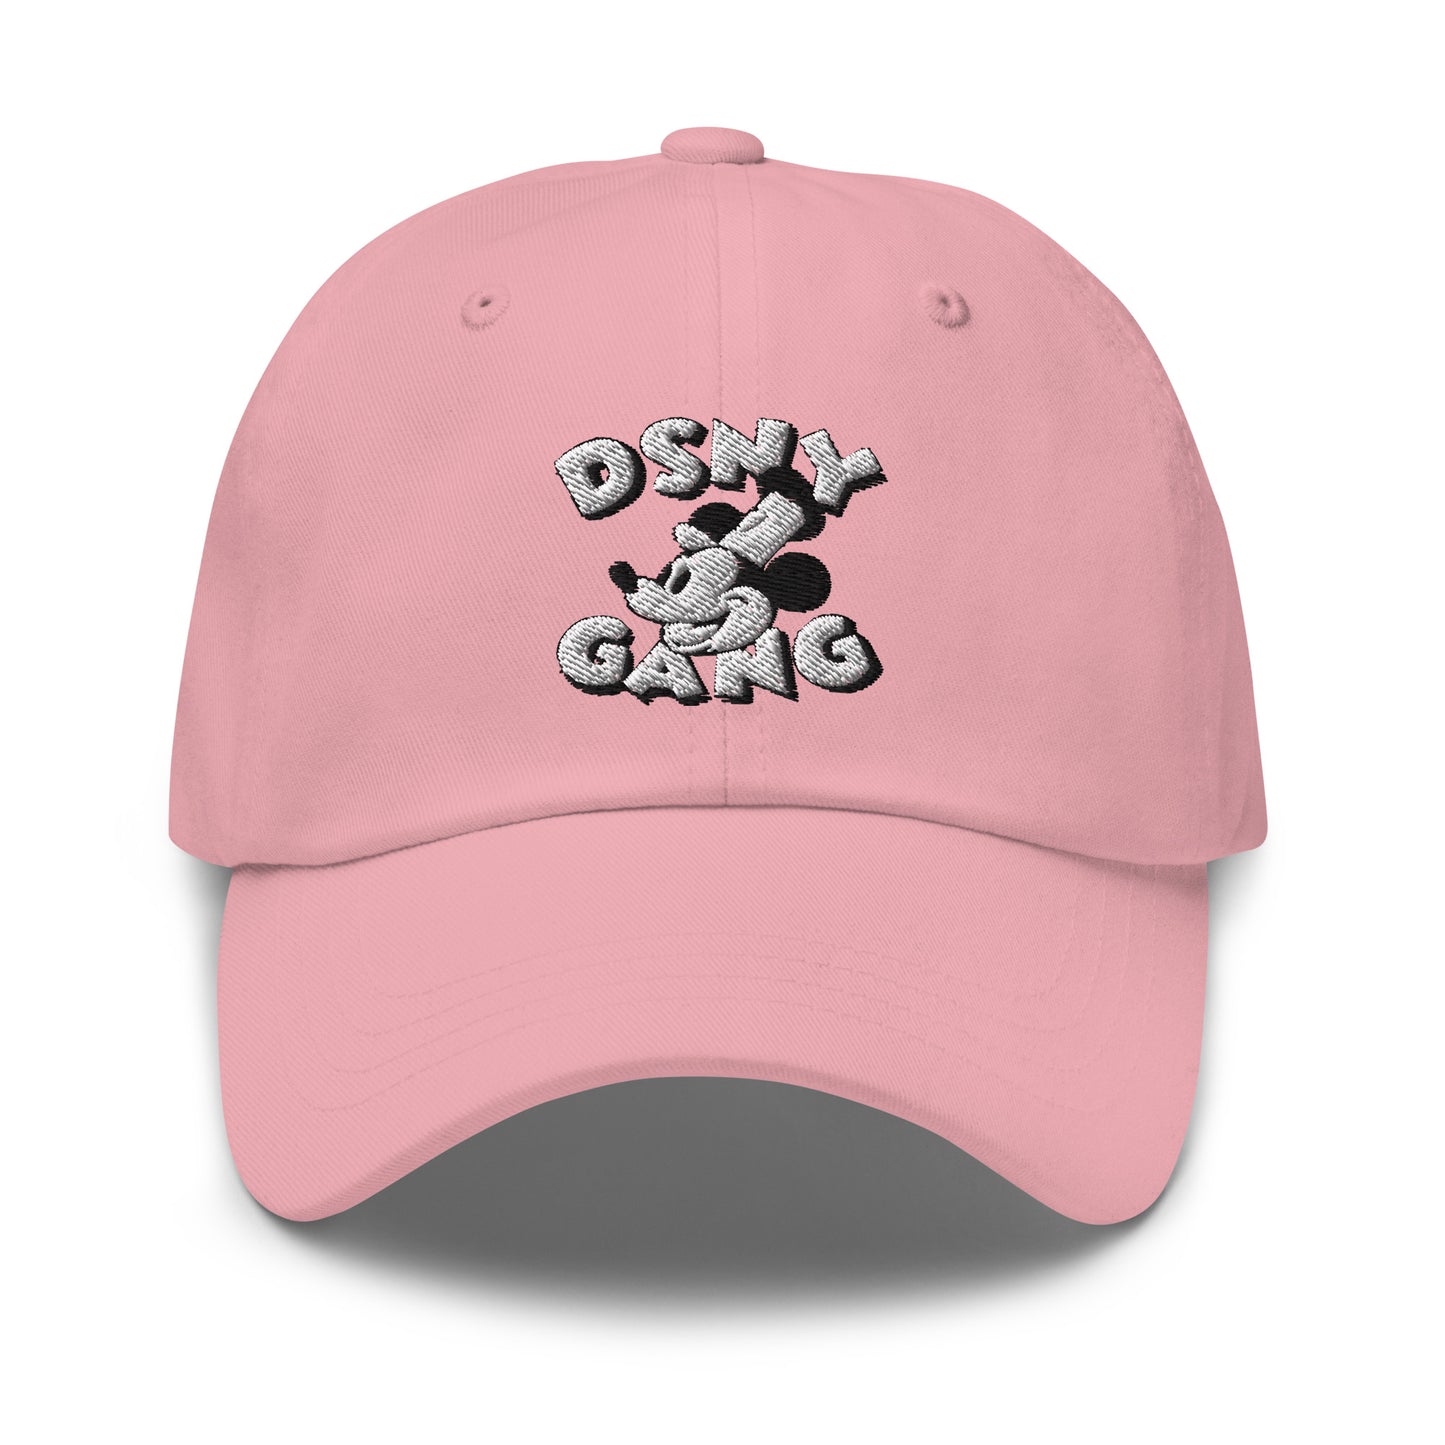 DSNY GANG Steamboat Willie Dad Hat